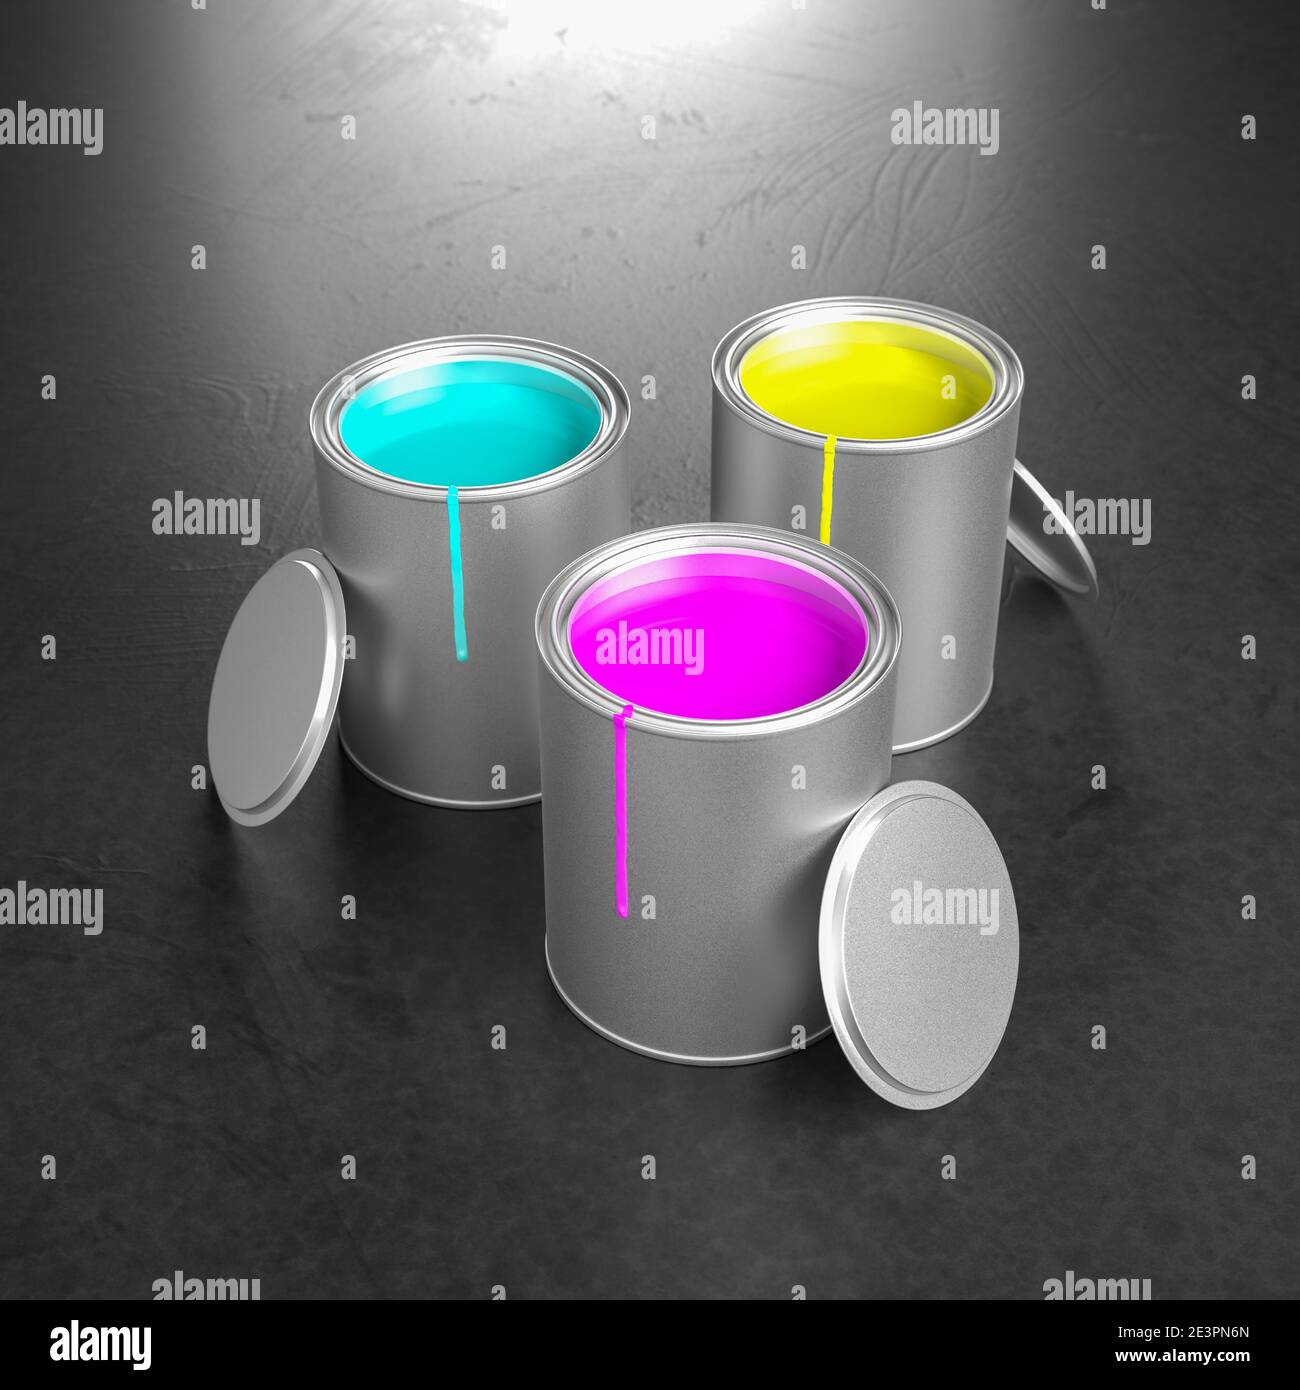 Paint pots with the CMY process colors of the subtractive color model: Cyan, Magenta, Yellow. Color stains on the pots, lids leaned to the pots. Stock Photo